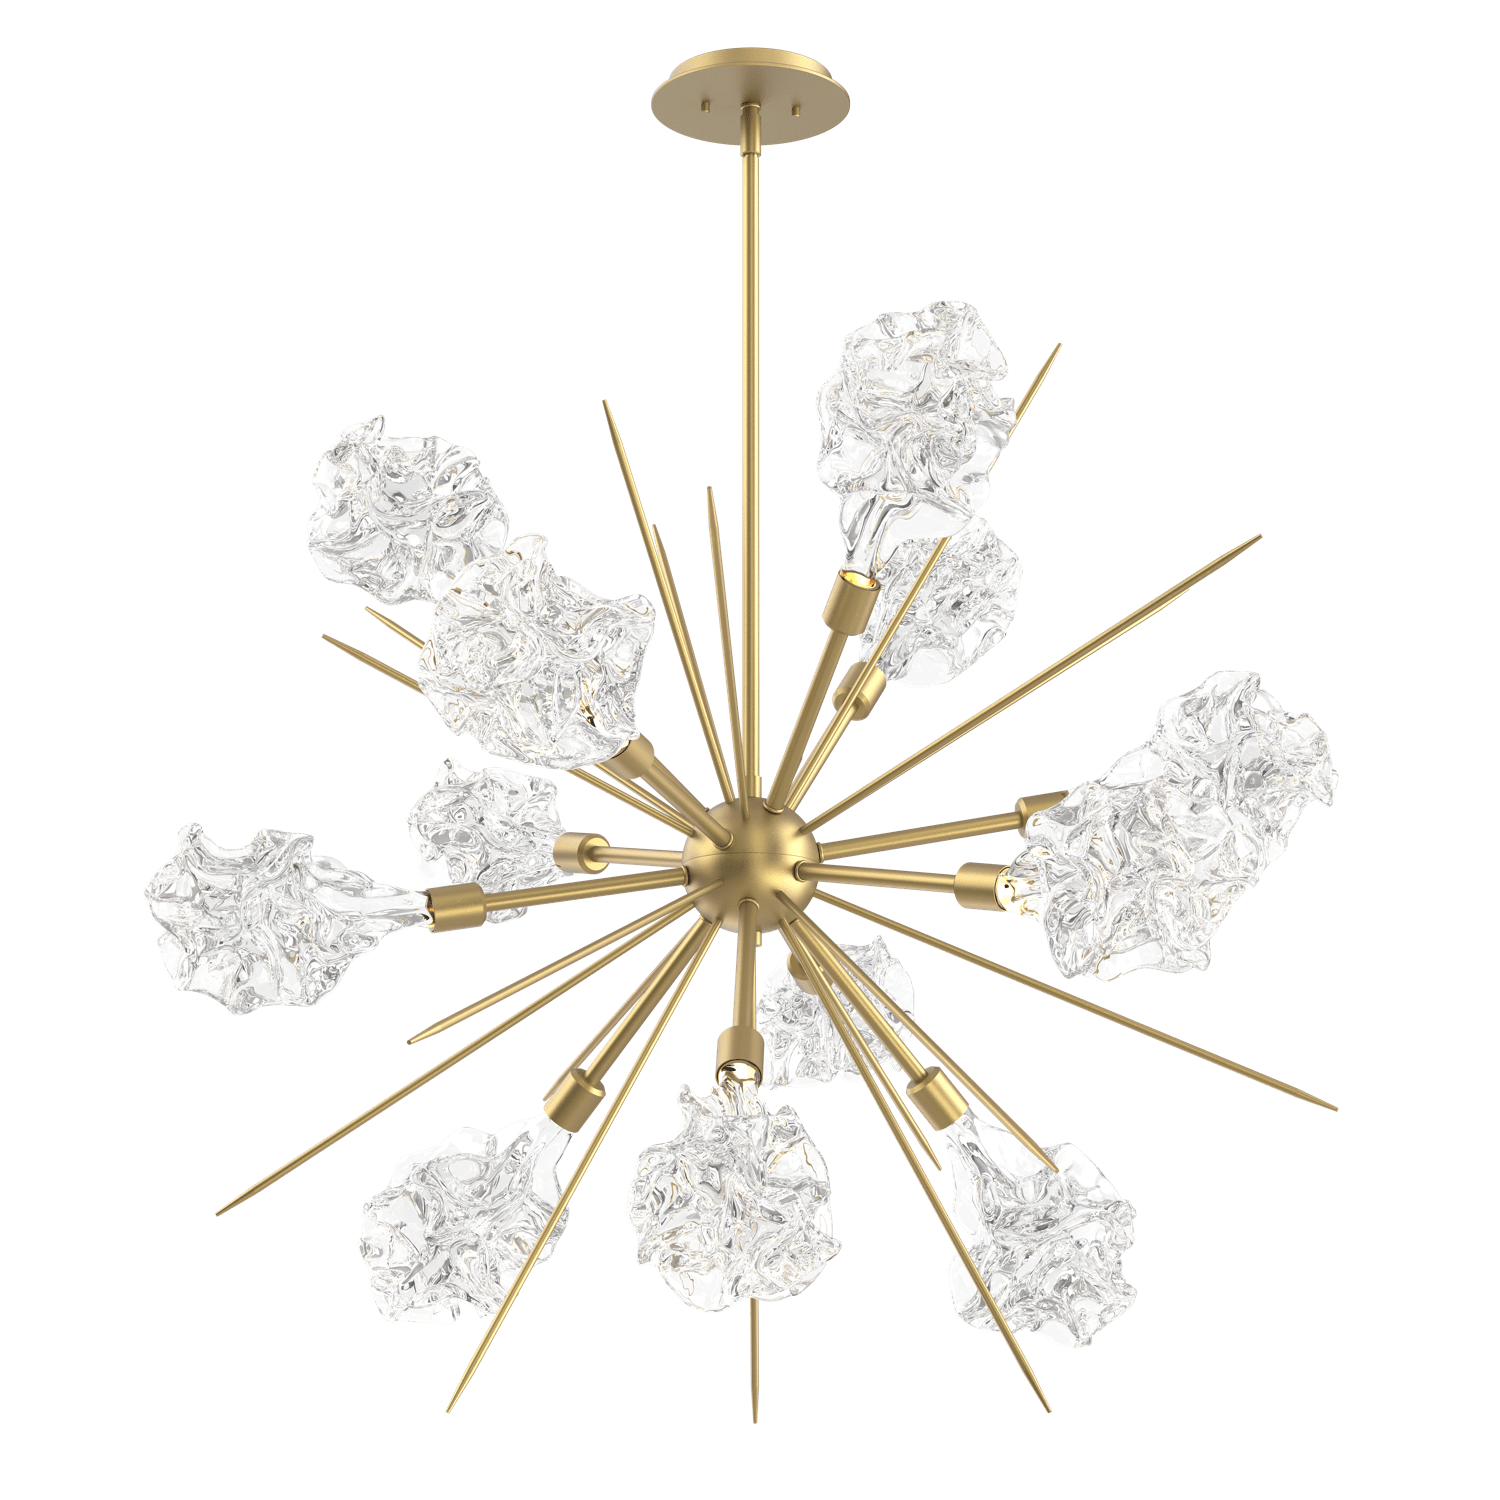 CHB0059-0A-GB-Hammerton-Studio-Blossom-35-inch-starburst-chandelier-with-gilded-brass-finish-and-clear-handblown-crystal-glass-shades-and-LED-lamping